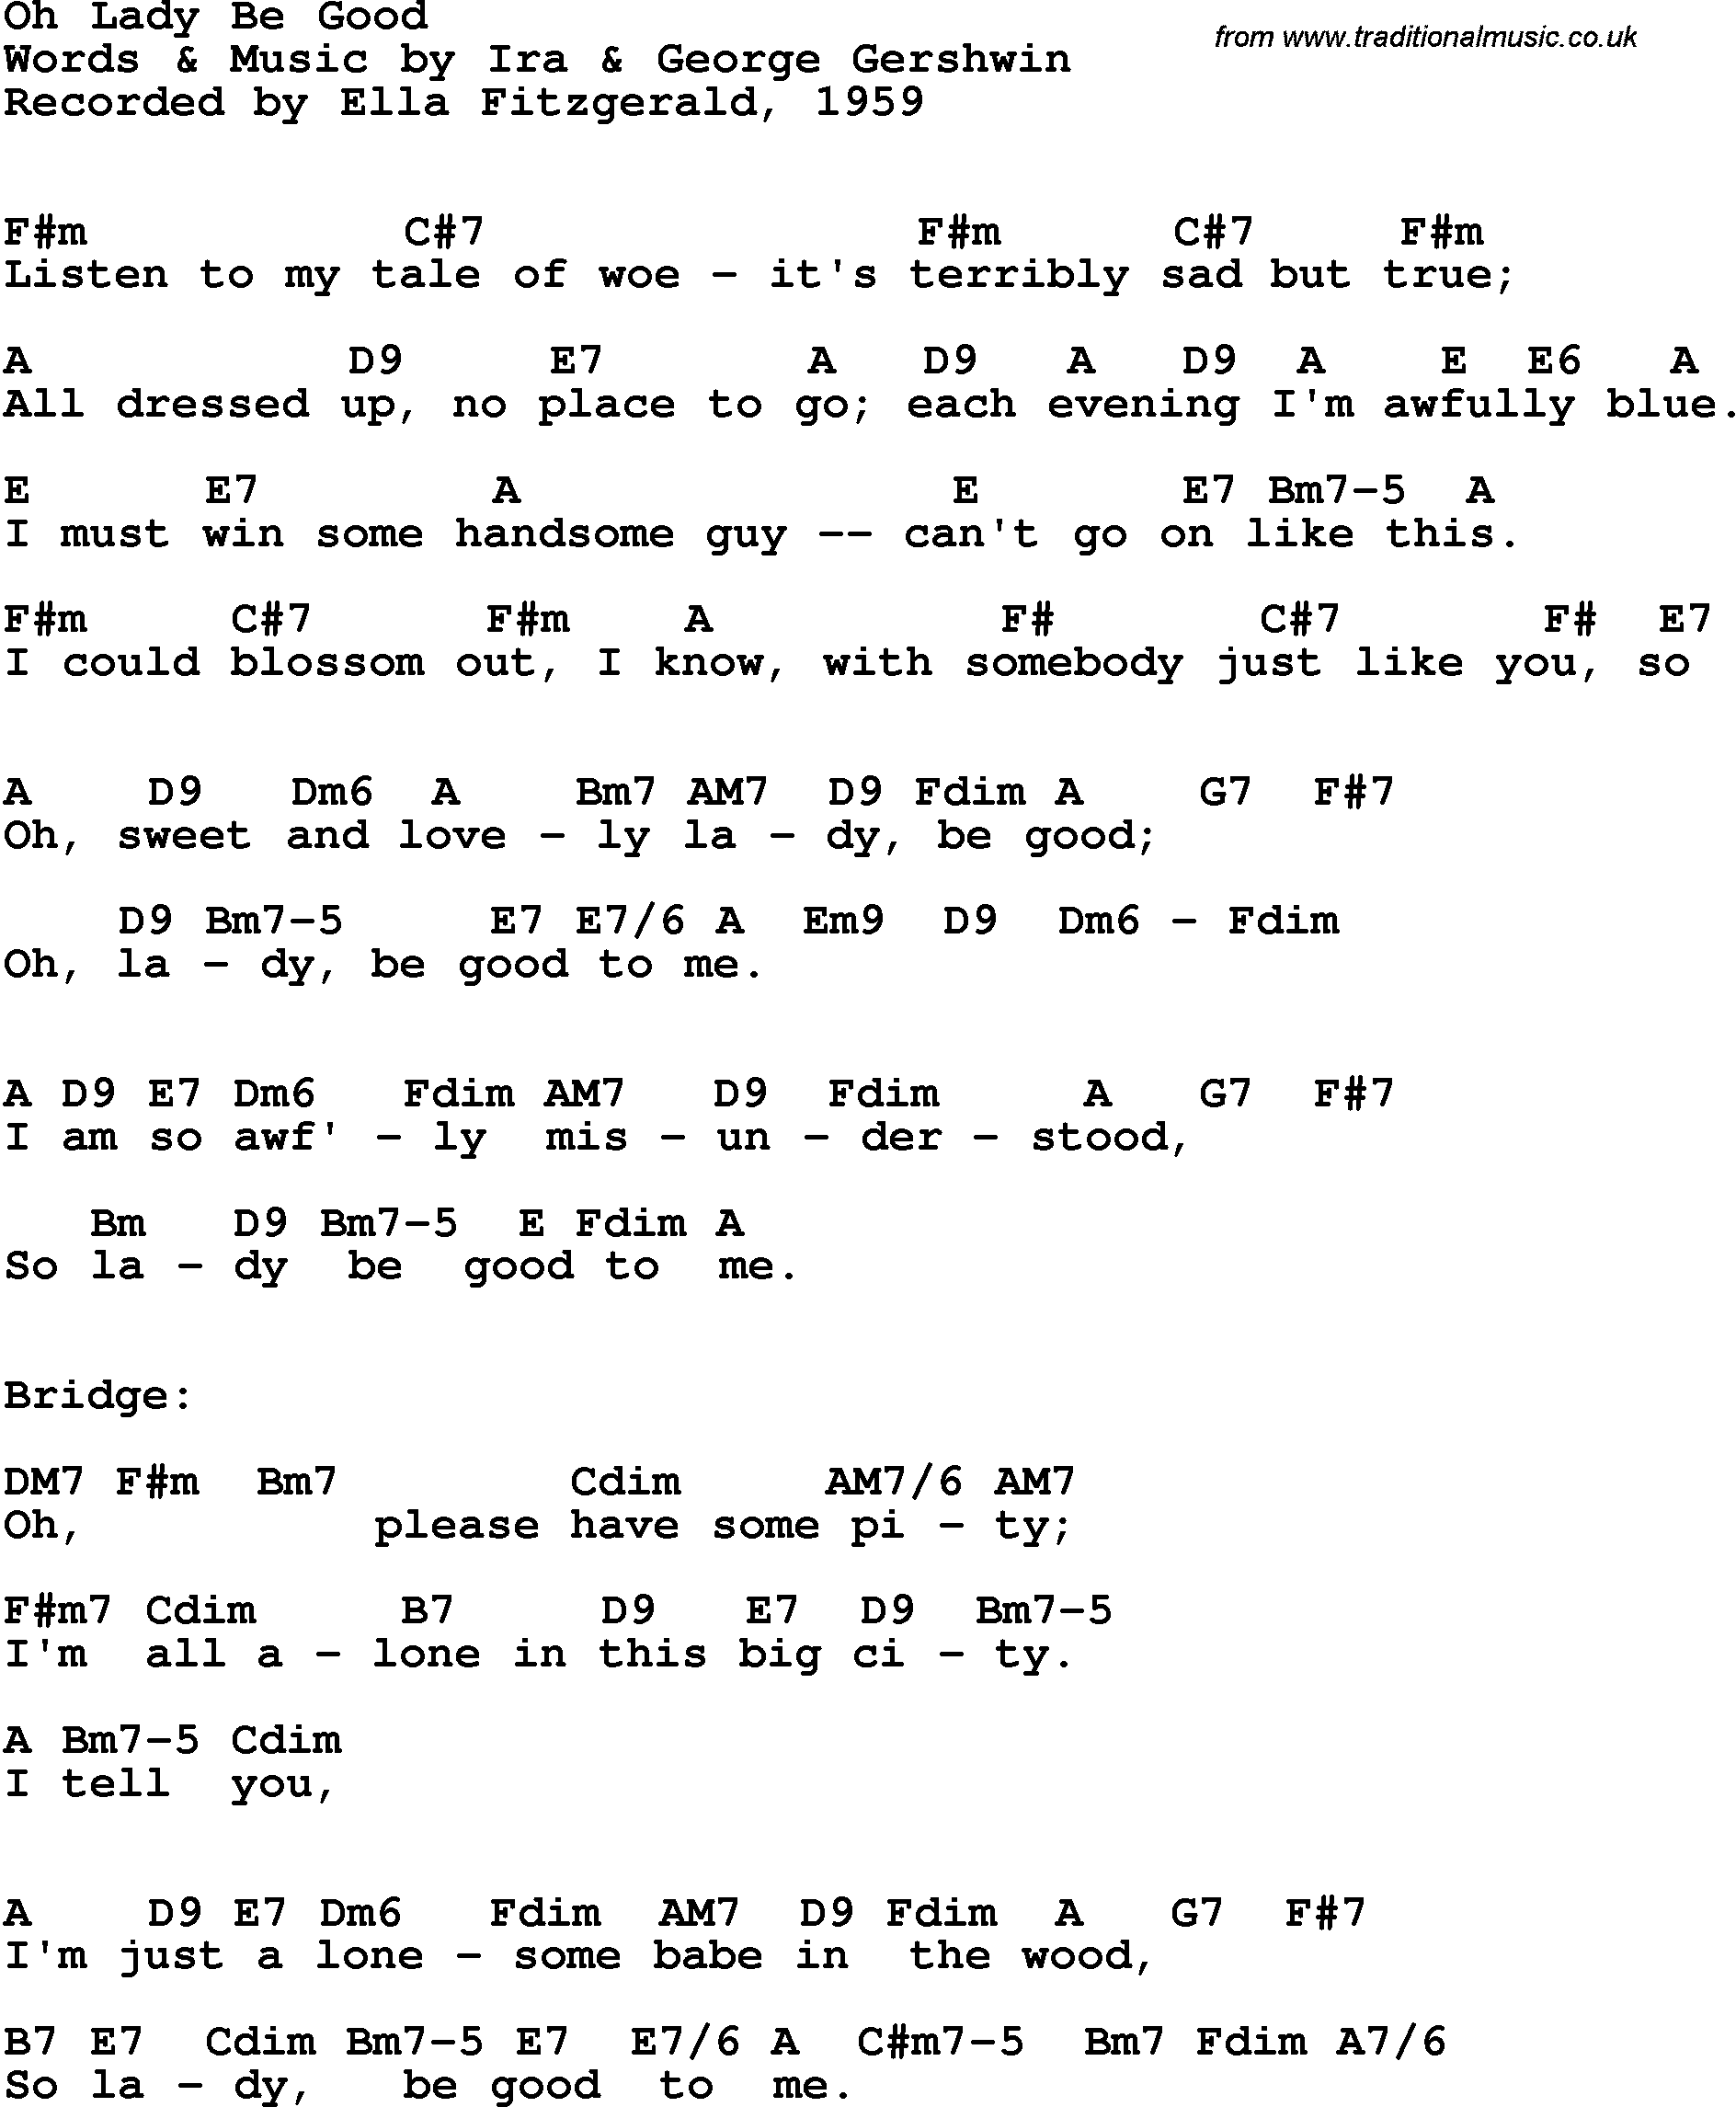 Song Lyrics with guitar chords for Oh Lady Be Good - Ella Fitzgerald, 1959